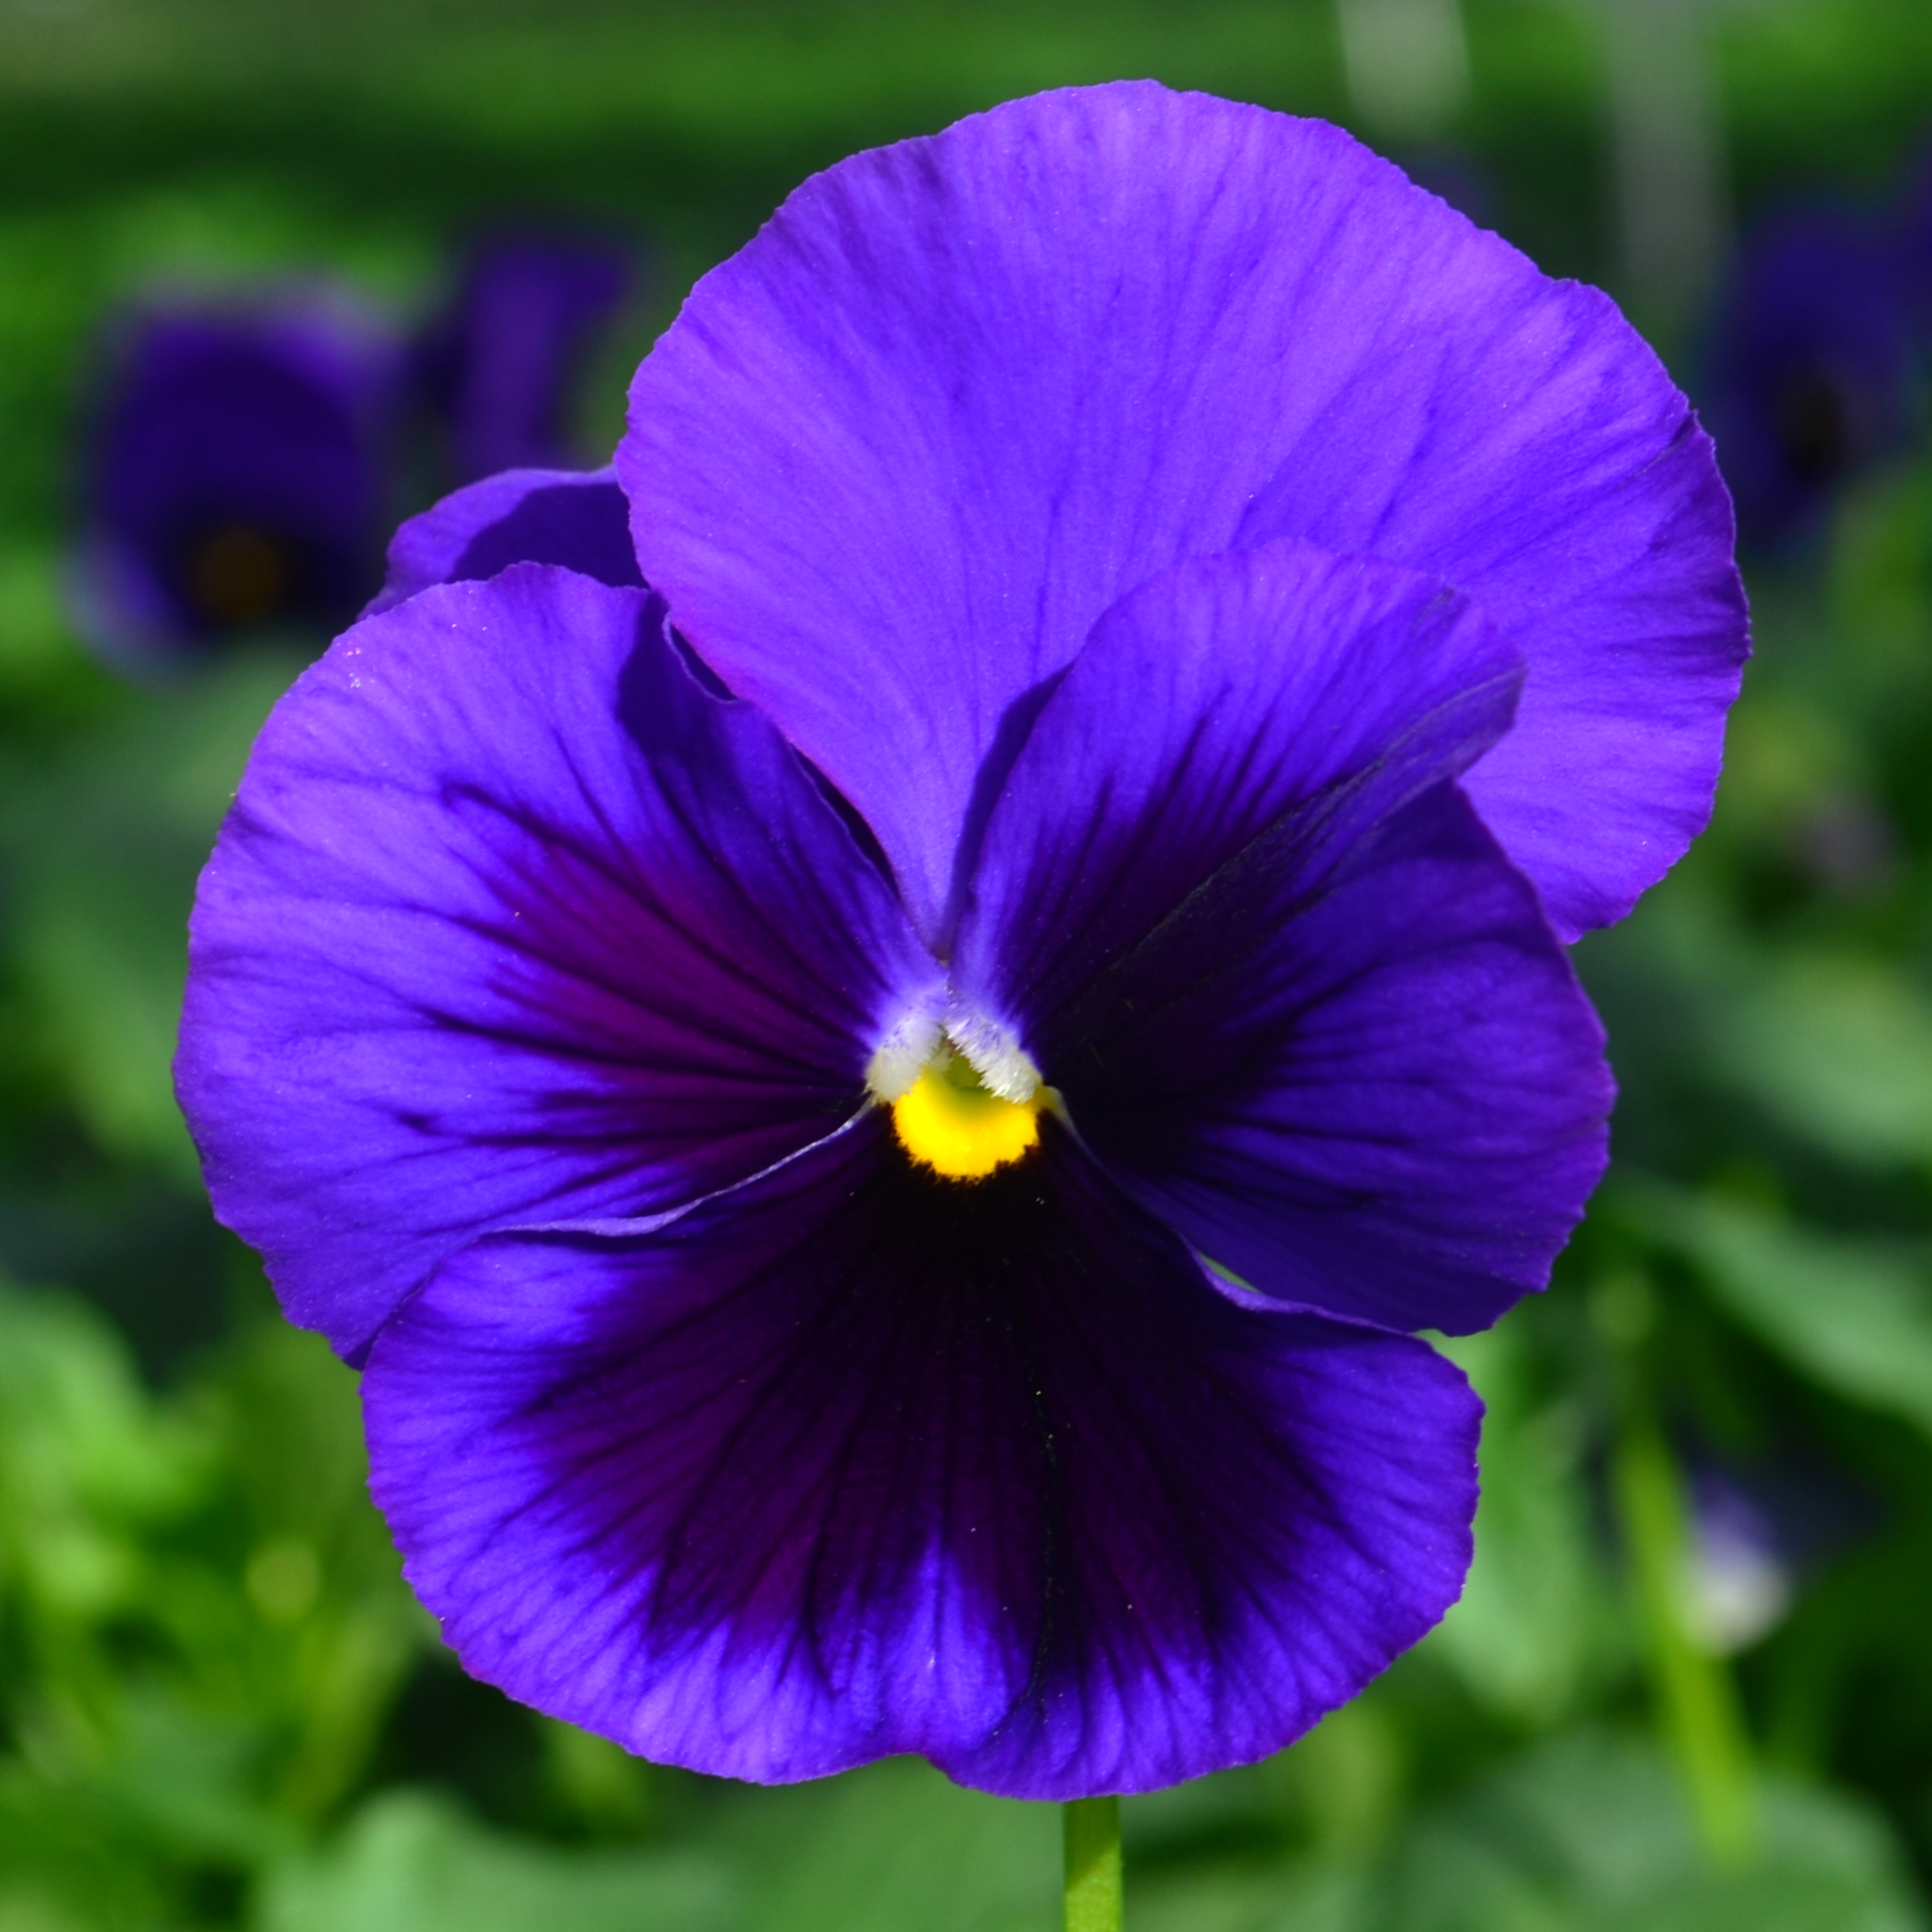 Viola wittrockiana Colossus 'Deep Blue with Blotch' - Pansy from Hillcrest Nursery